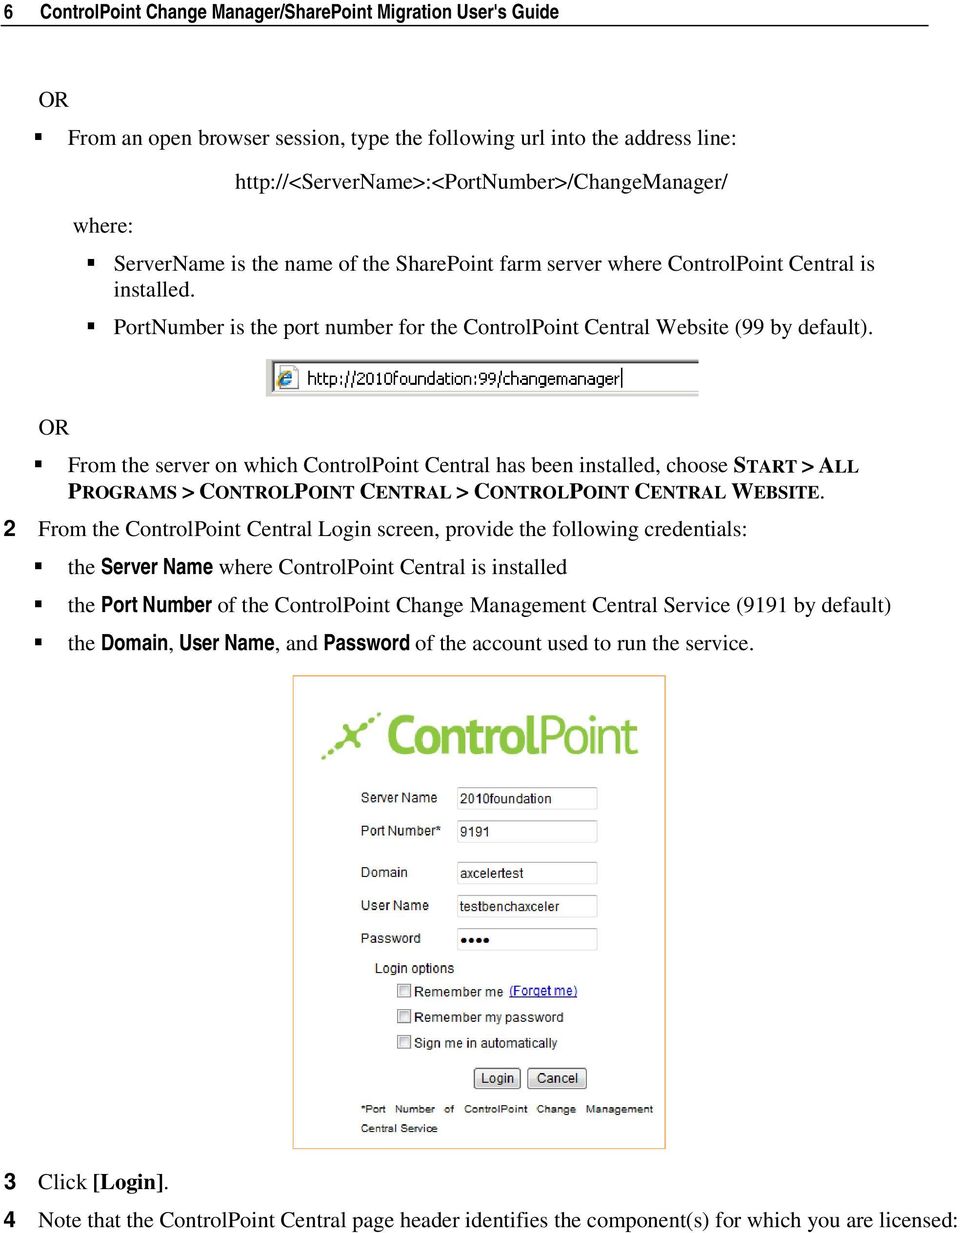 OR From the server on which ControlPoint Central has been installed, choose START > ALL PROGRAMS > CONTROLPOINT CENTRAL > CONTROLPOINT CENTRAL WEBSITE.